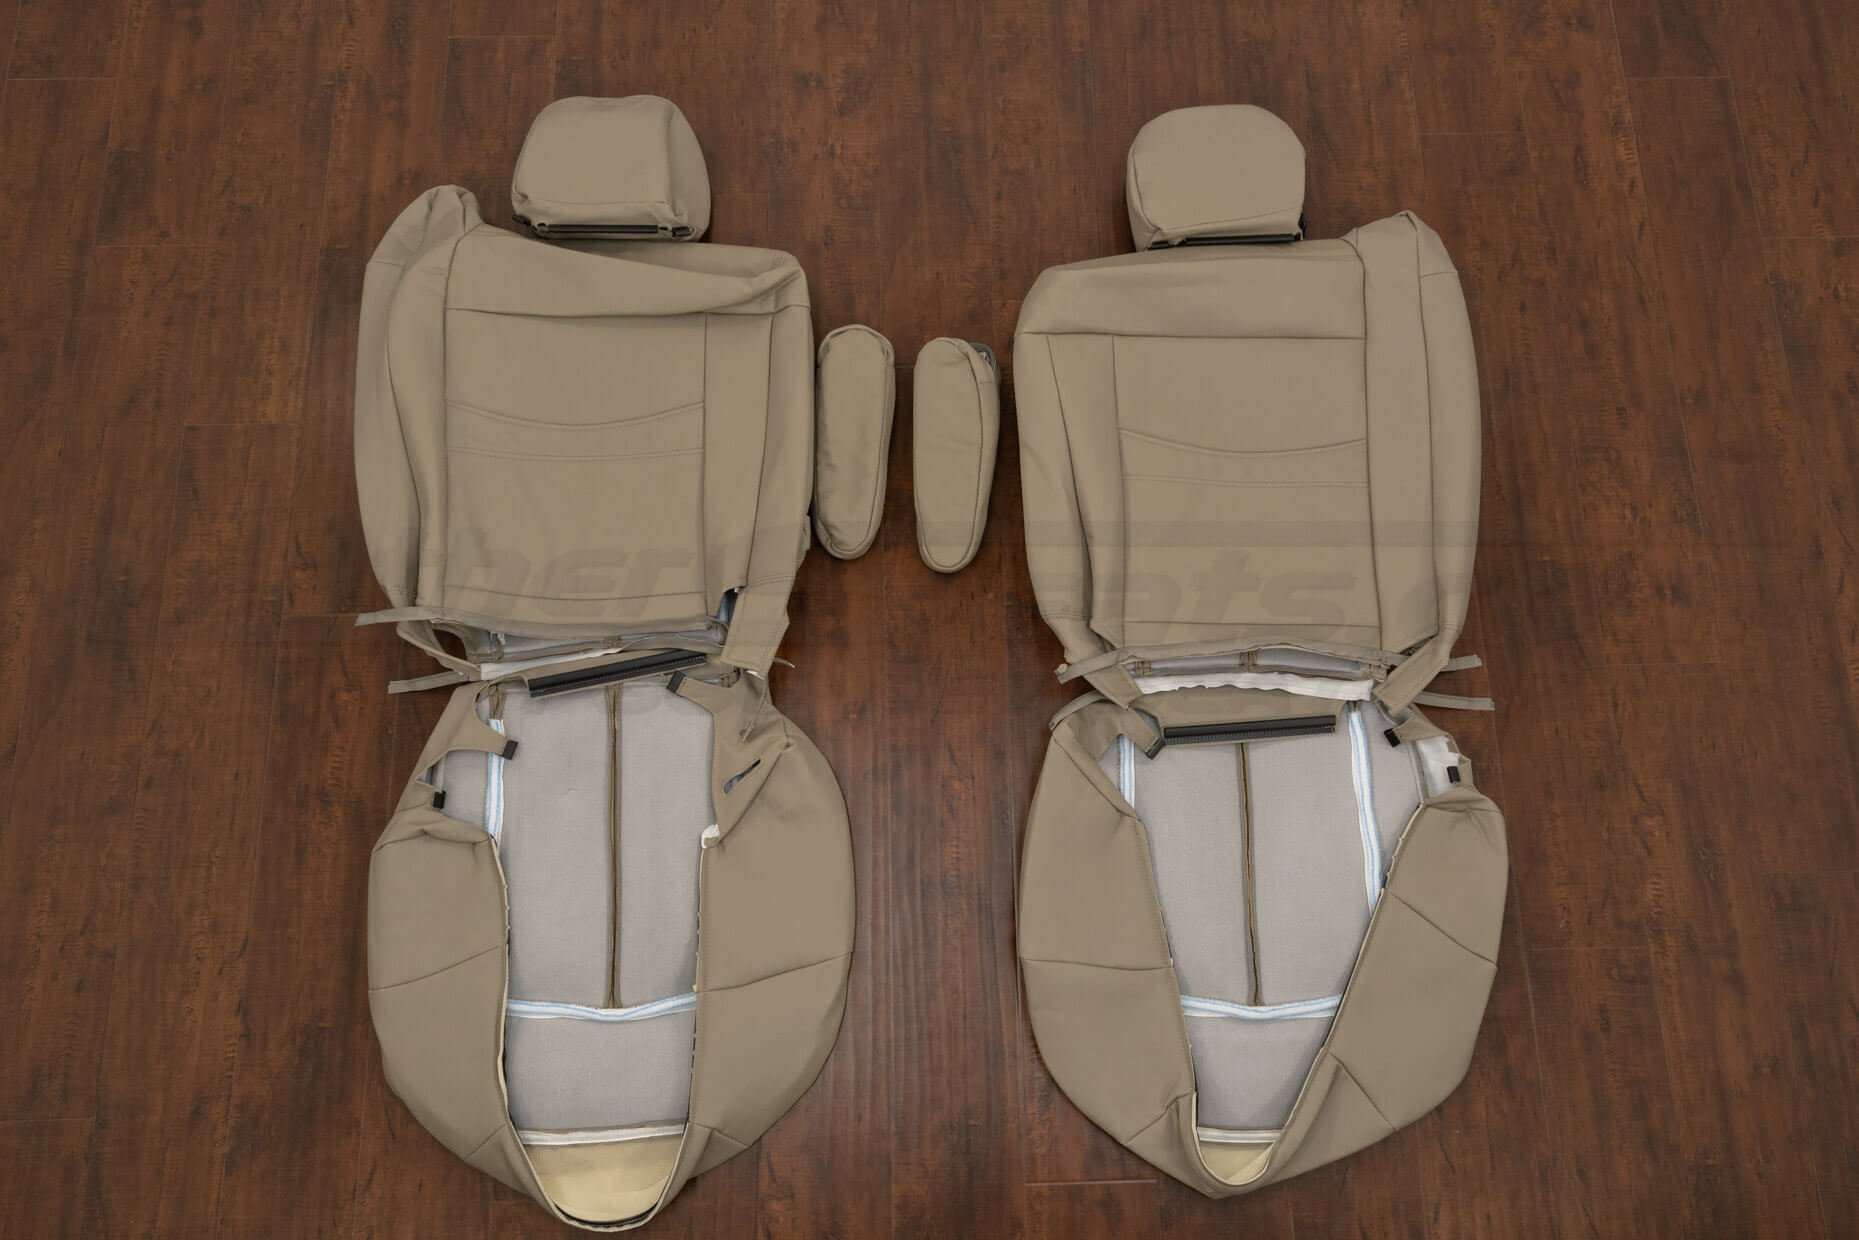 Back view of front seat upholstery & armrests